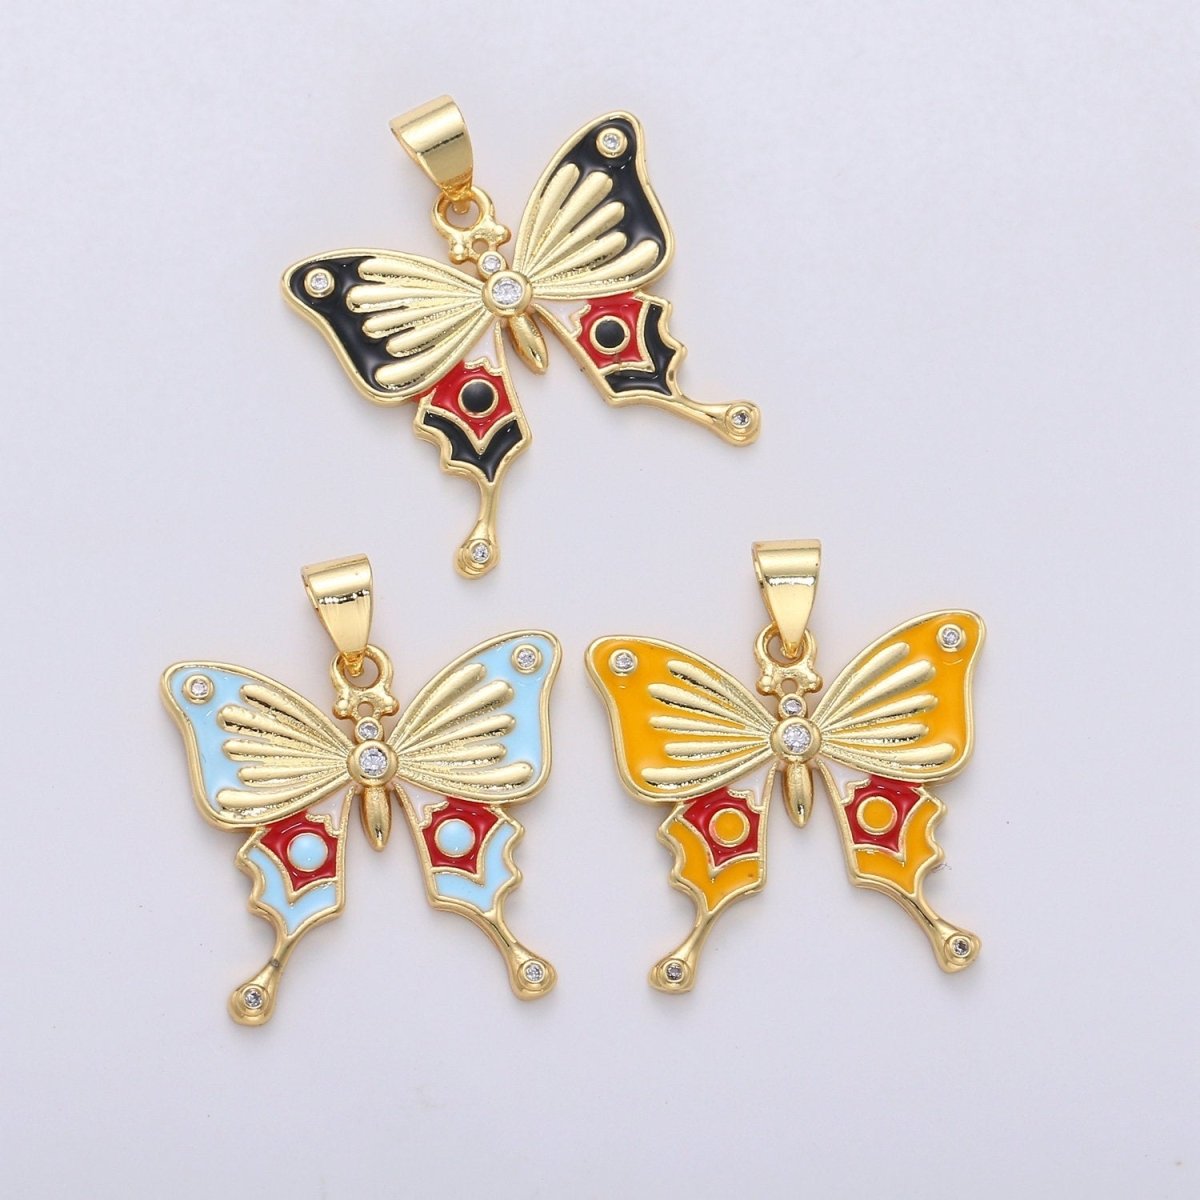 1x Enamel Mariposa Butterfly Gold Filled Butterfly Pendant Dream Animal Lover Necklace Pendant Charm Designer Colorful Jewelry Making I-791~I-793 - DLUXCA